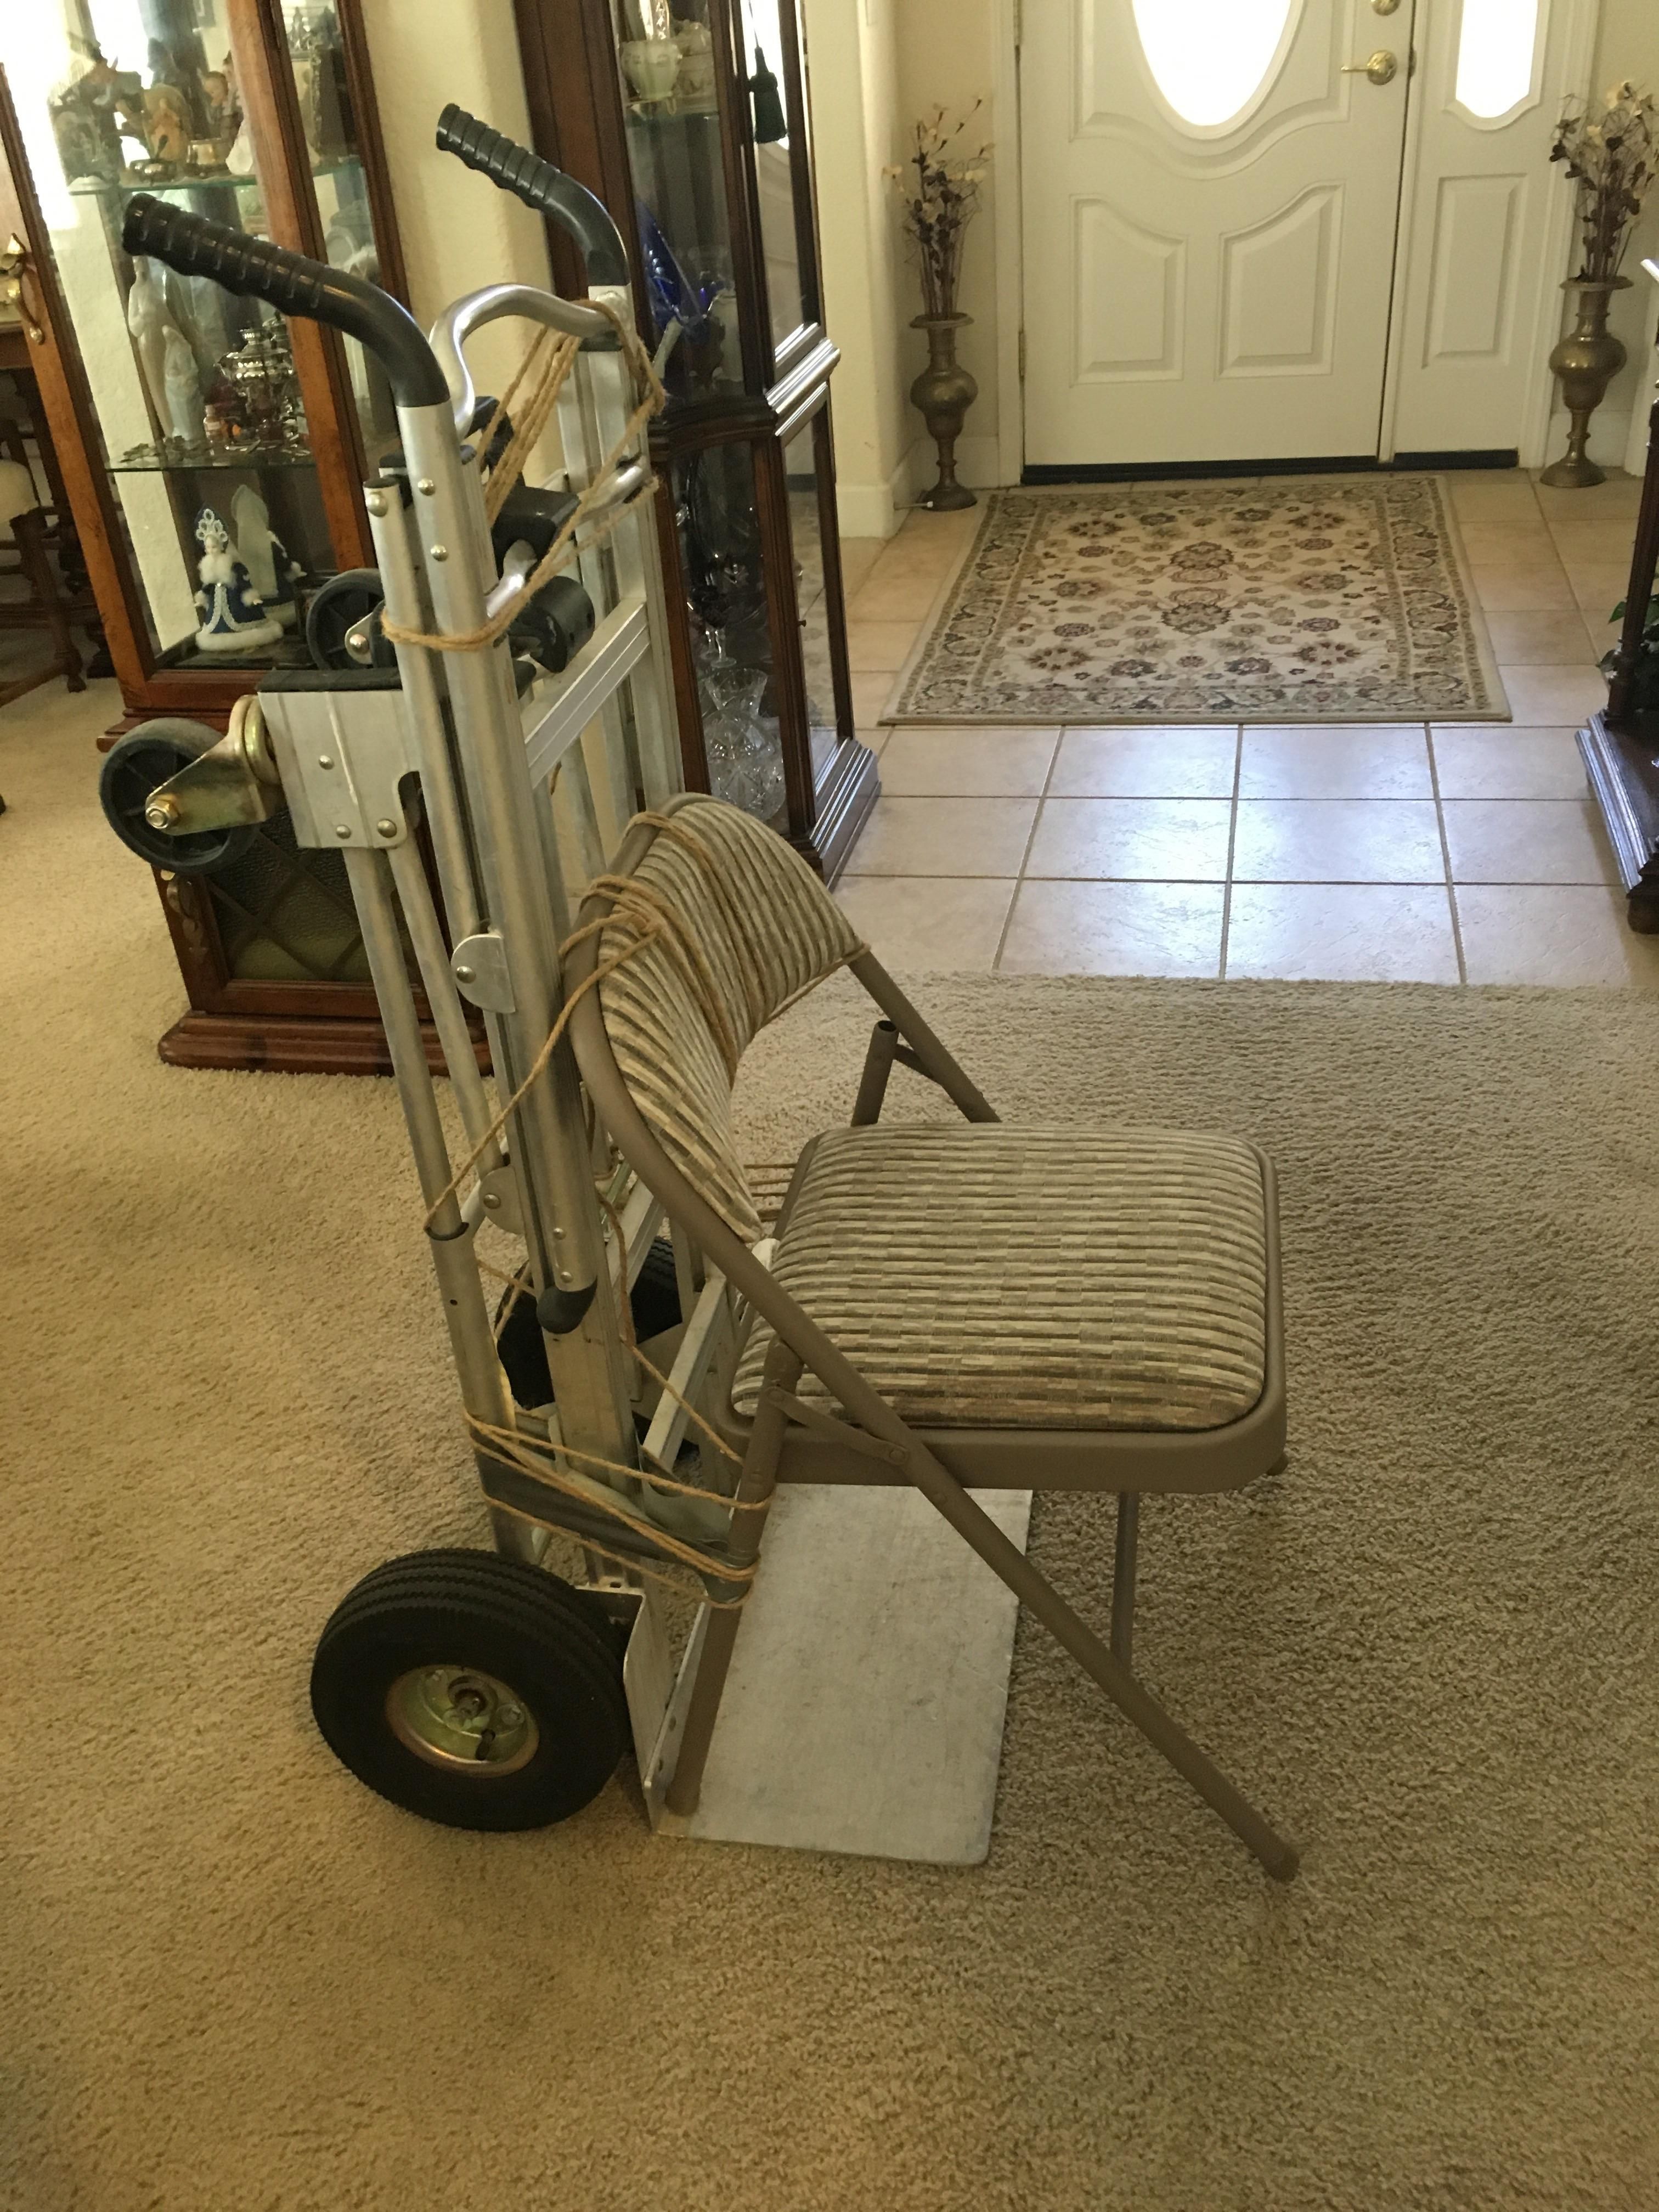 My mom needed a wheelchair so my dad improvised.